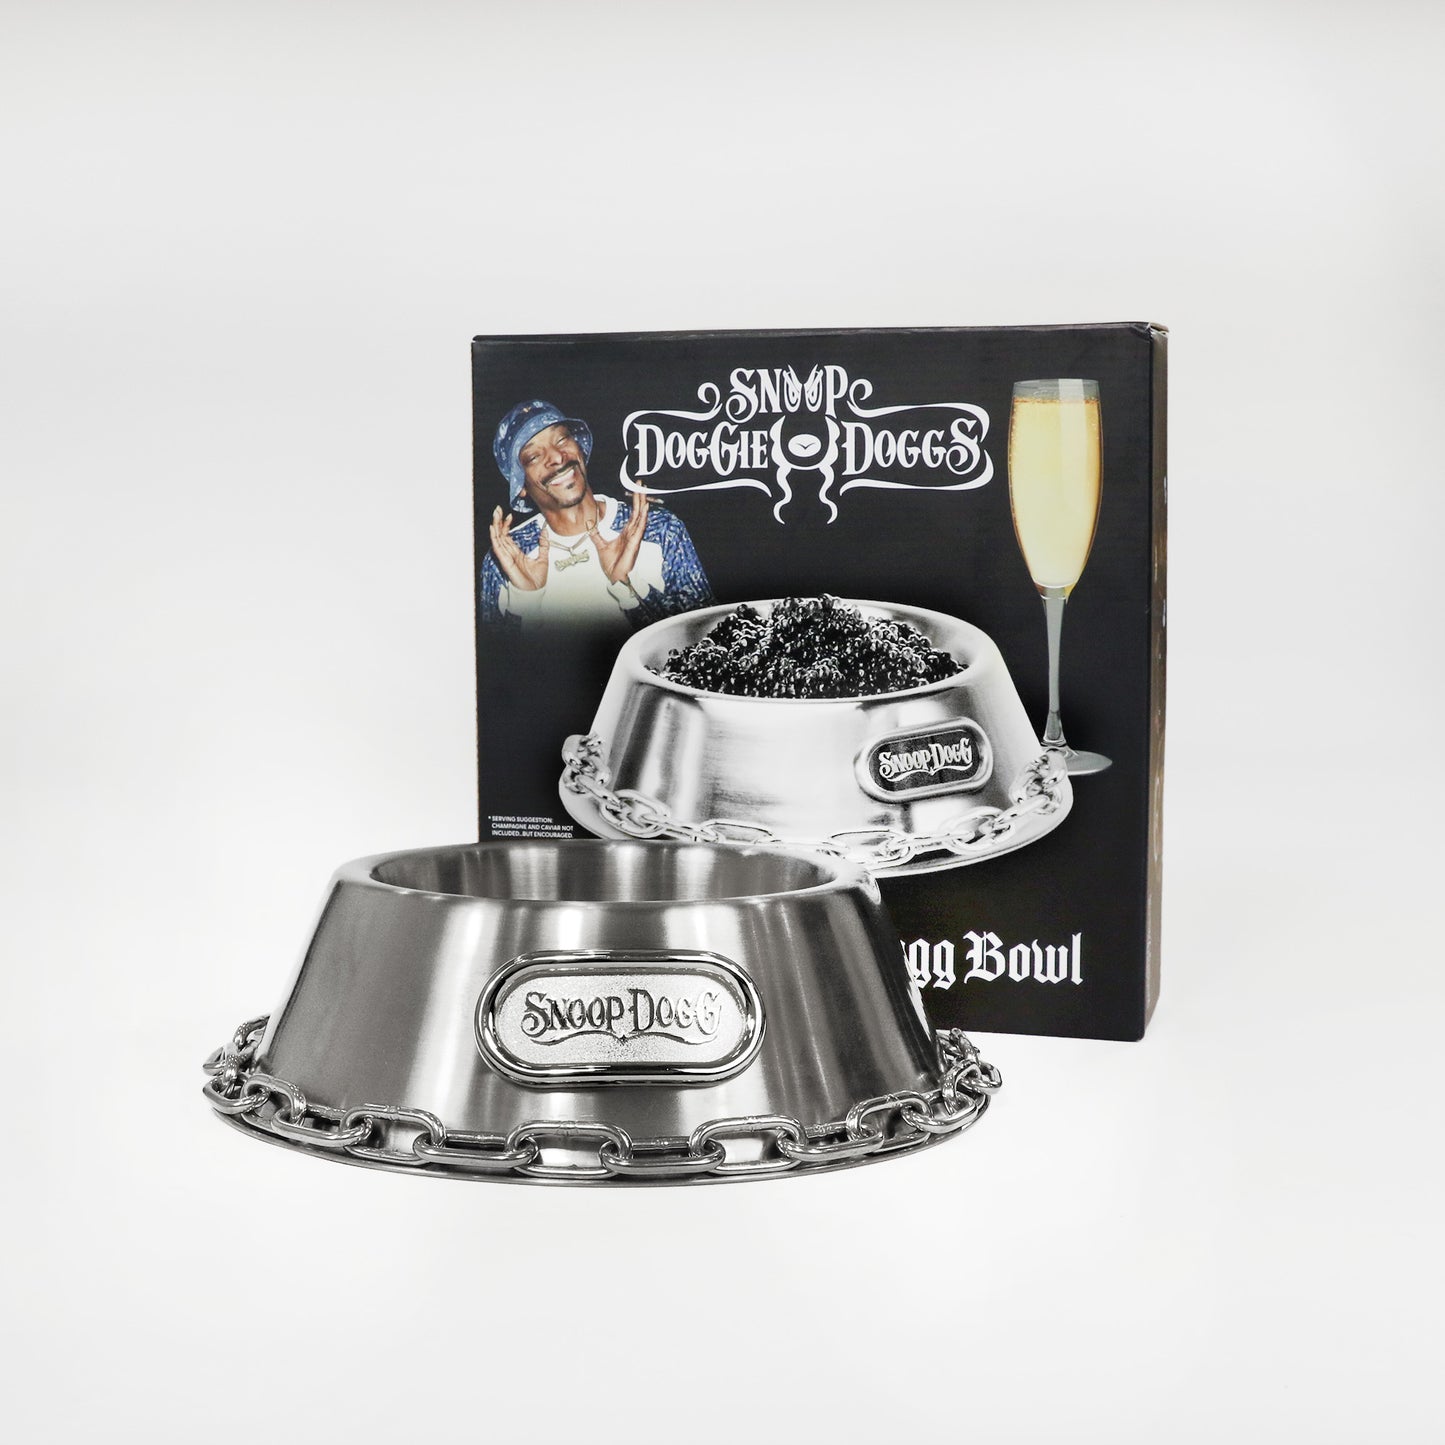 Product flat lay of the Deluxe Silver Pet Bowl and packaging.